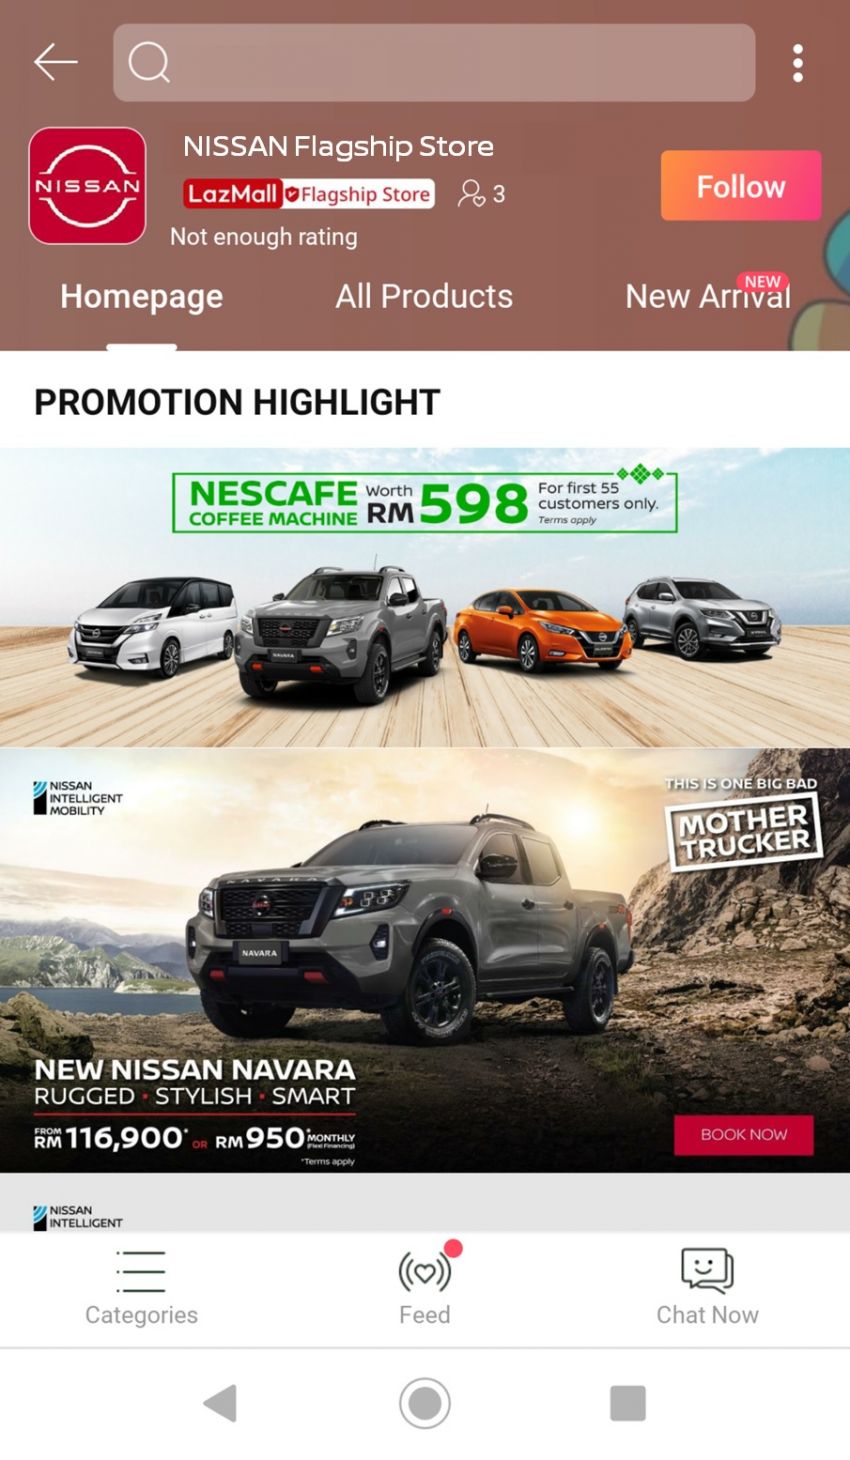 ETCM launches Nissan Flagship Store on Lazada, first 55 customers get free Nescafe machine worth RM598 Image #1290741